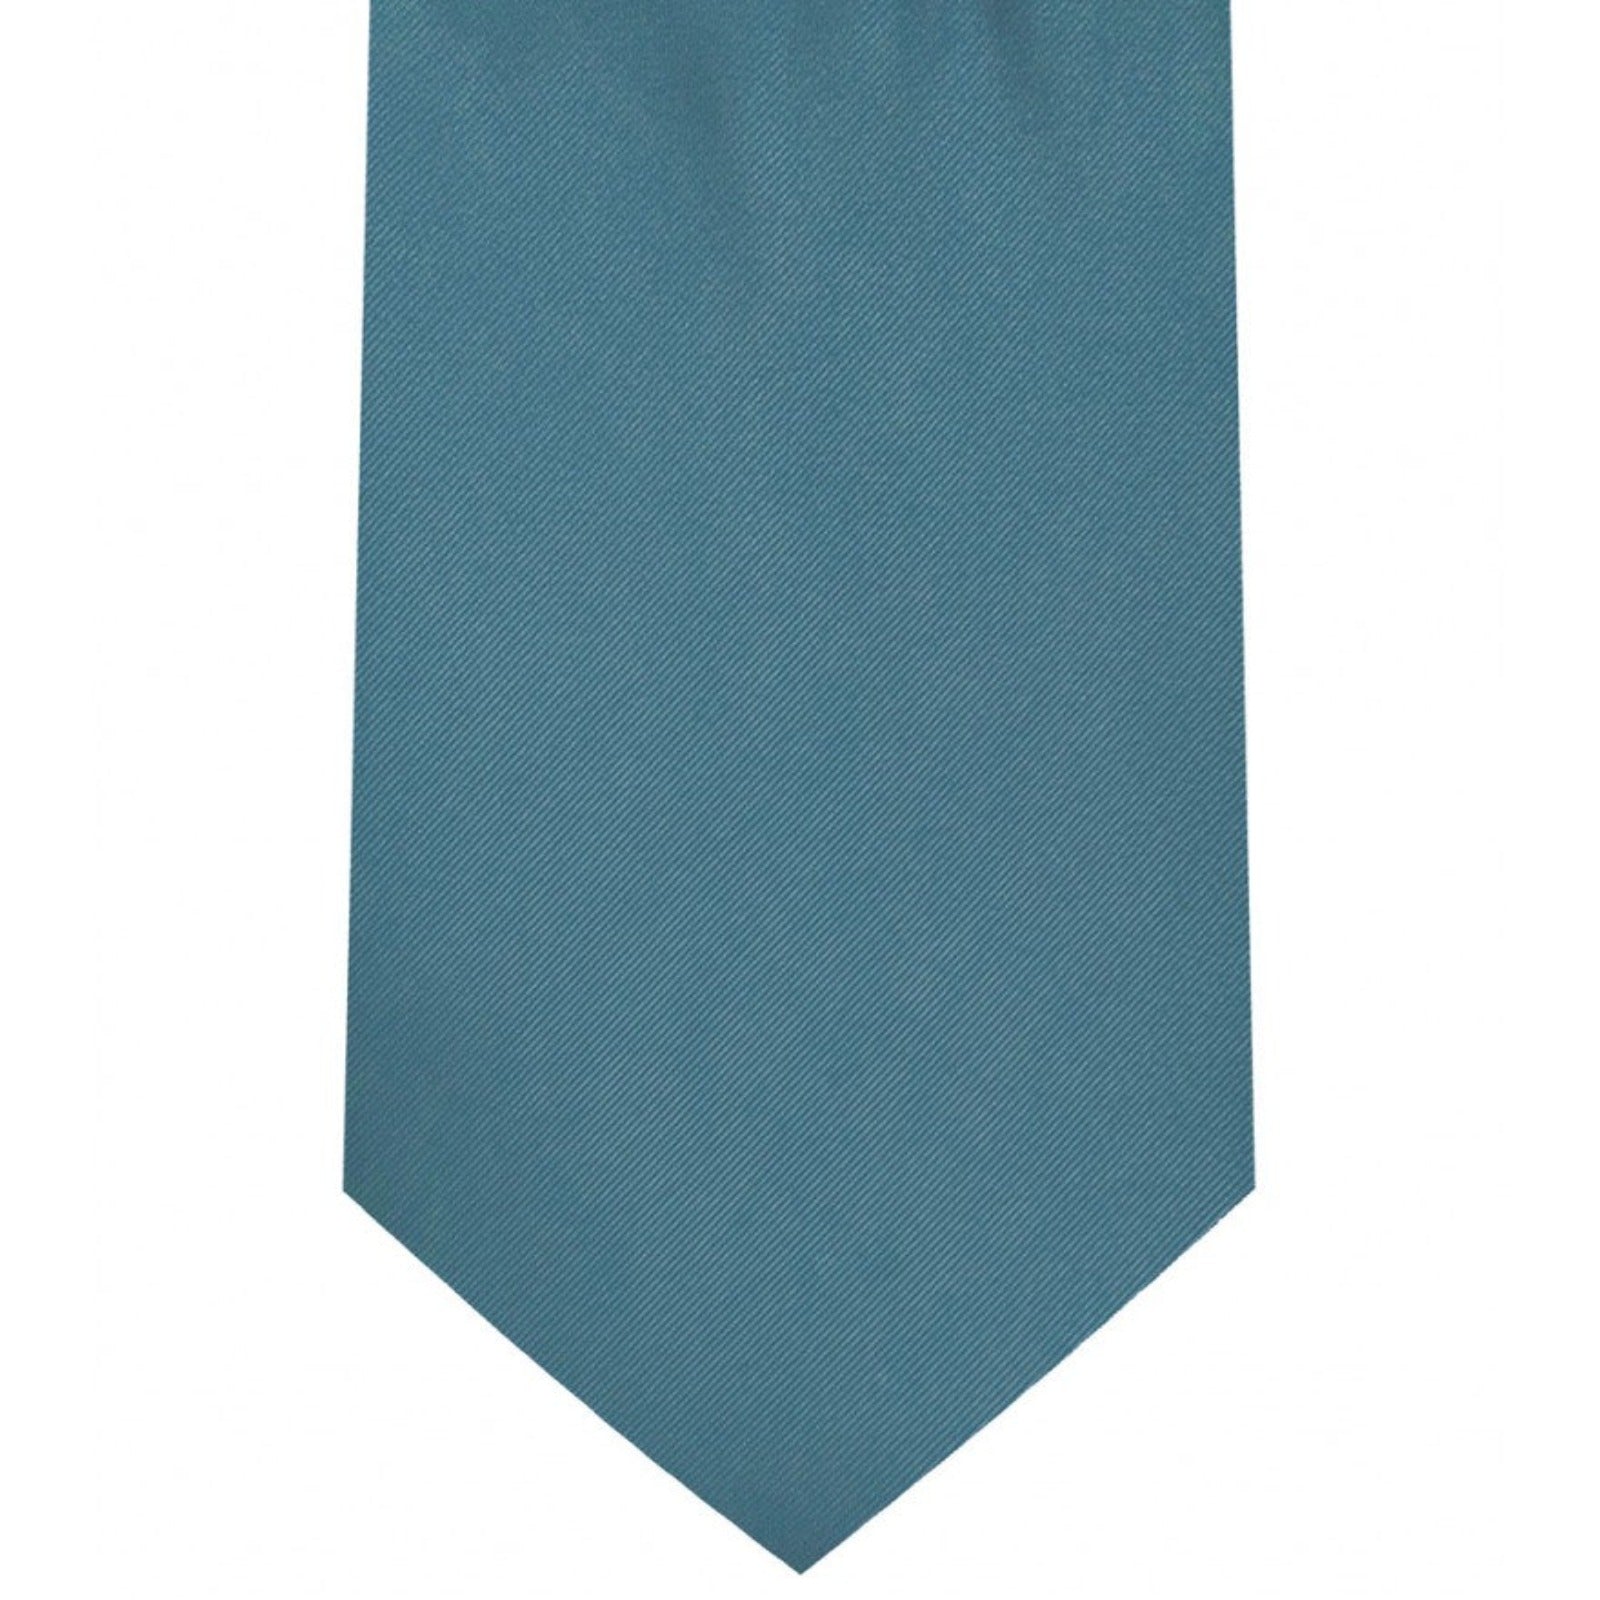 Classic Carolina Blue Tie Regular width 3.5 inches With Matching Pocket Square | KCT Menswear